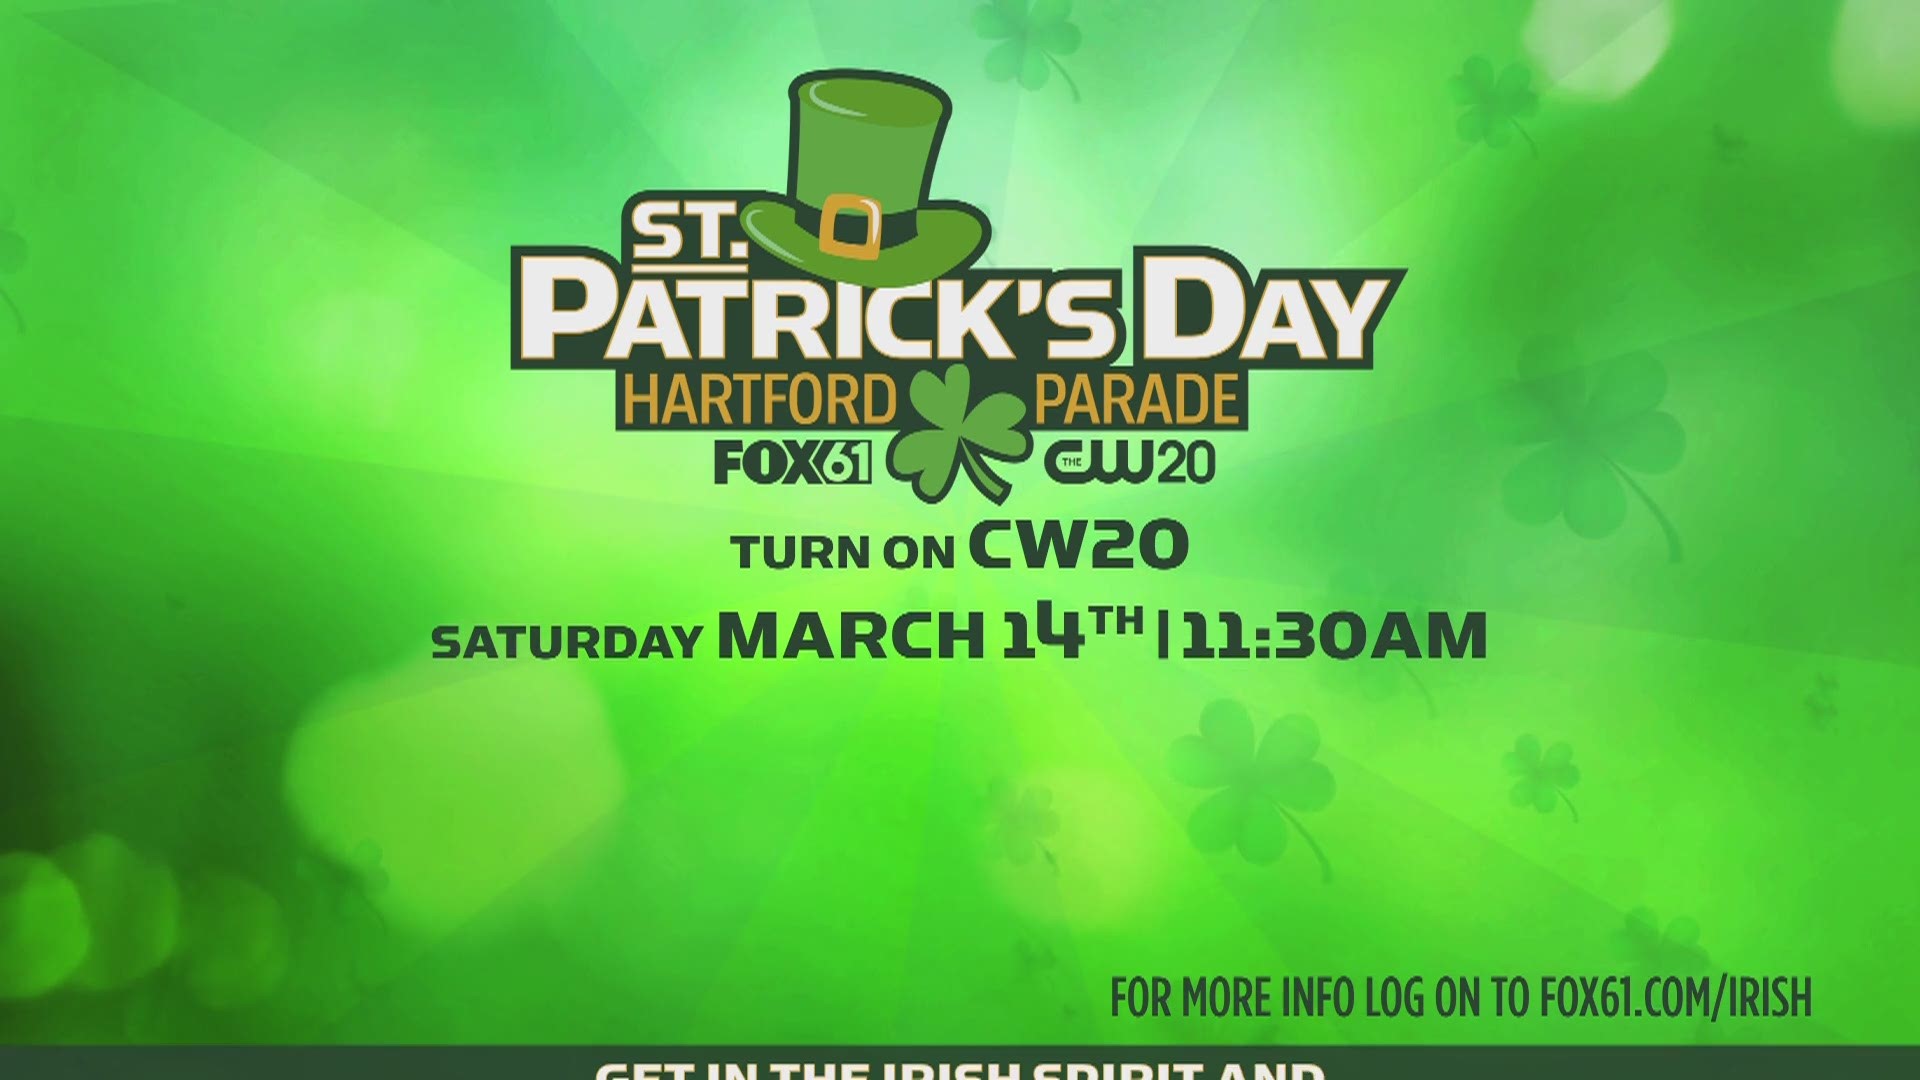 The 2020 Greater Hartford Saint Patrick's Day Parade has been cancelled over health concerns.